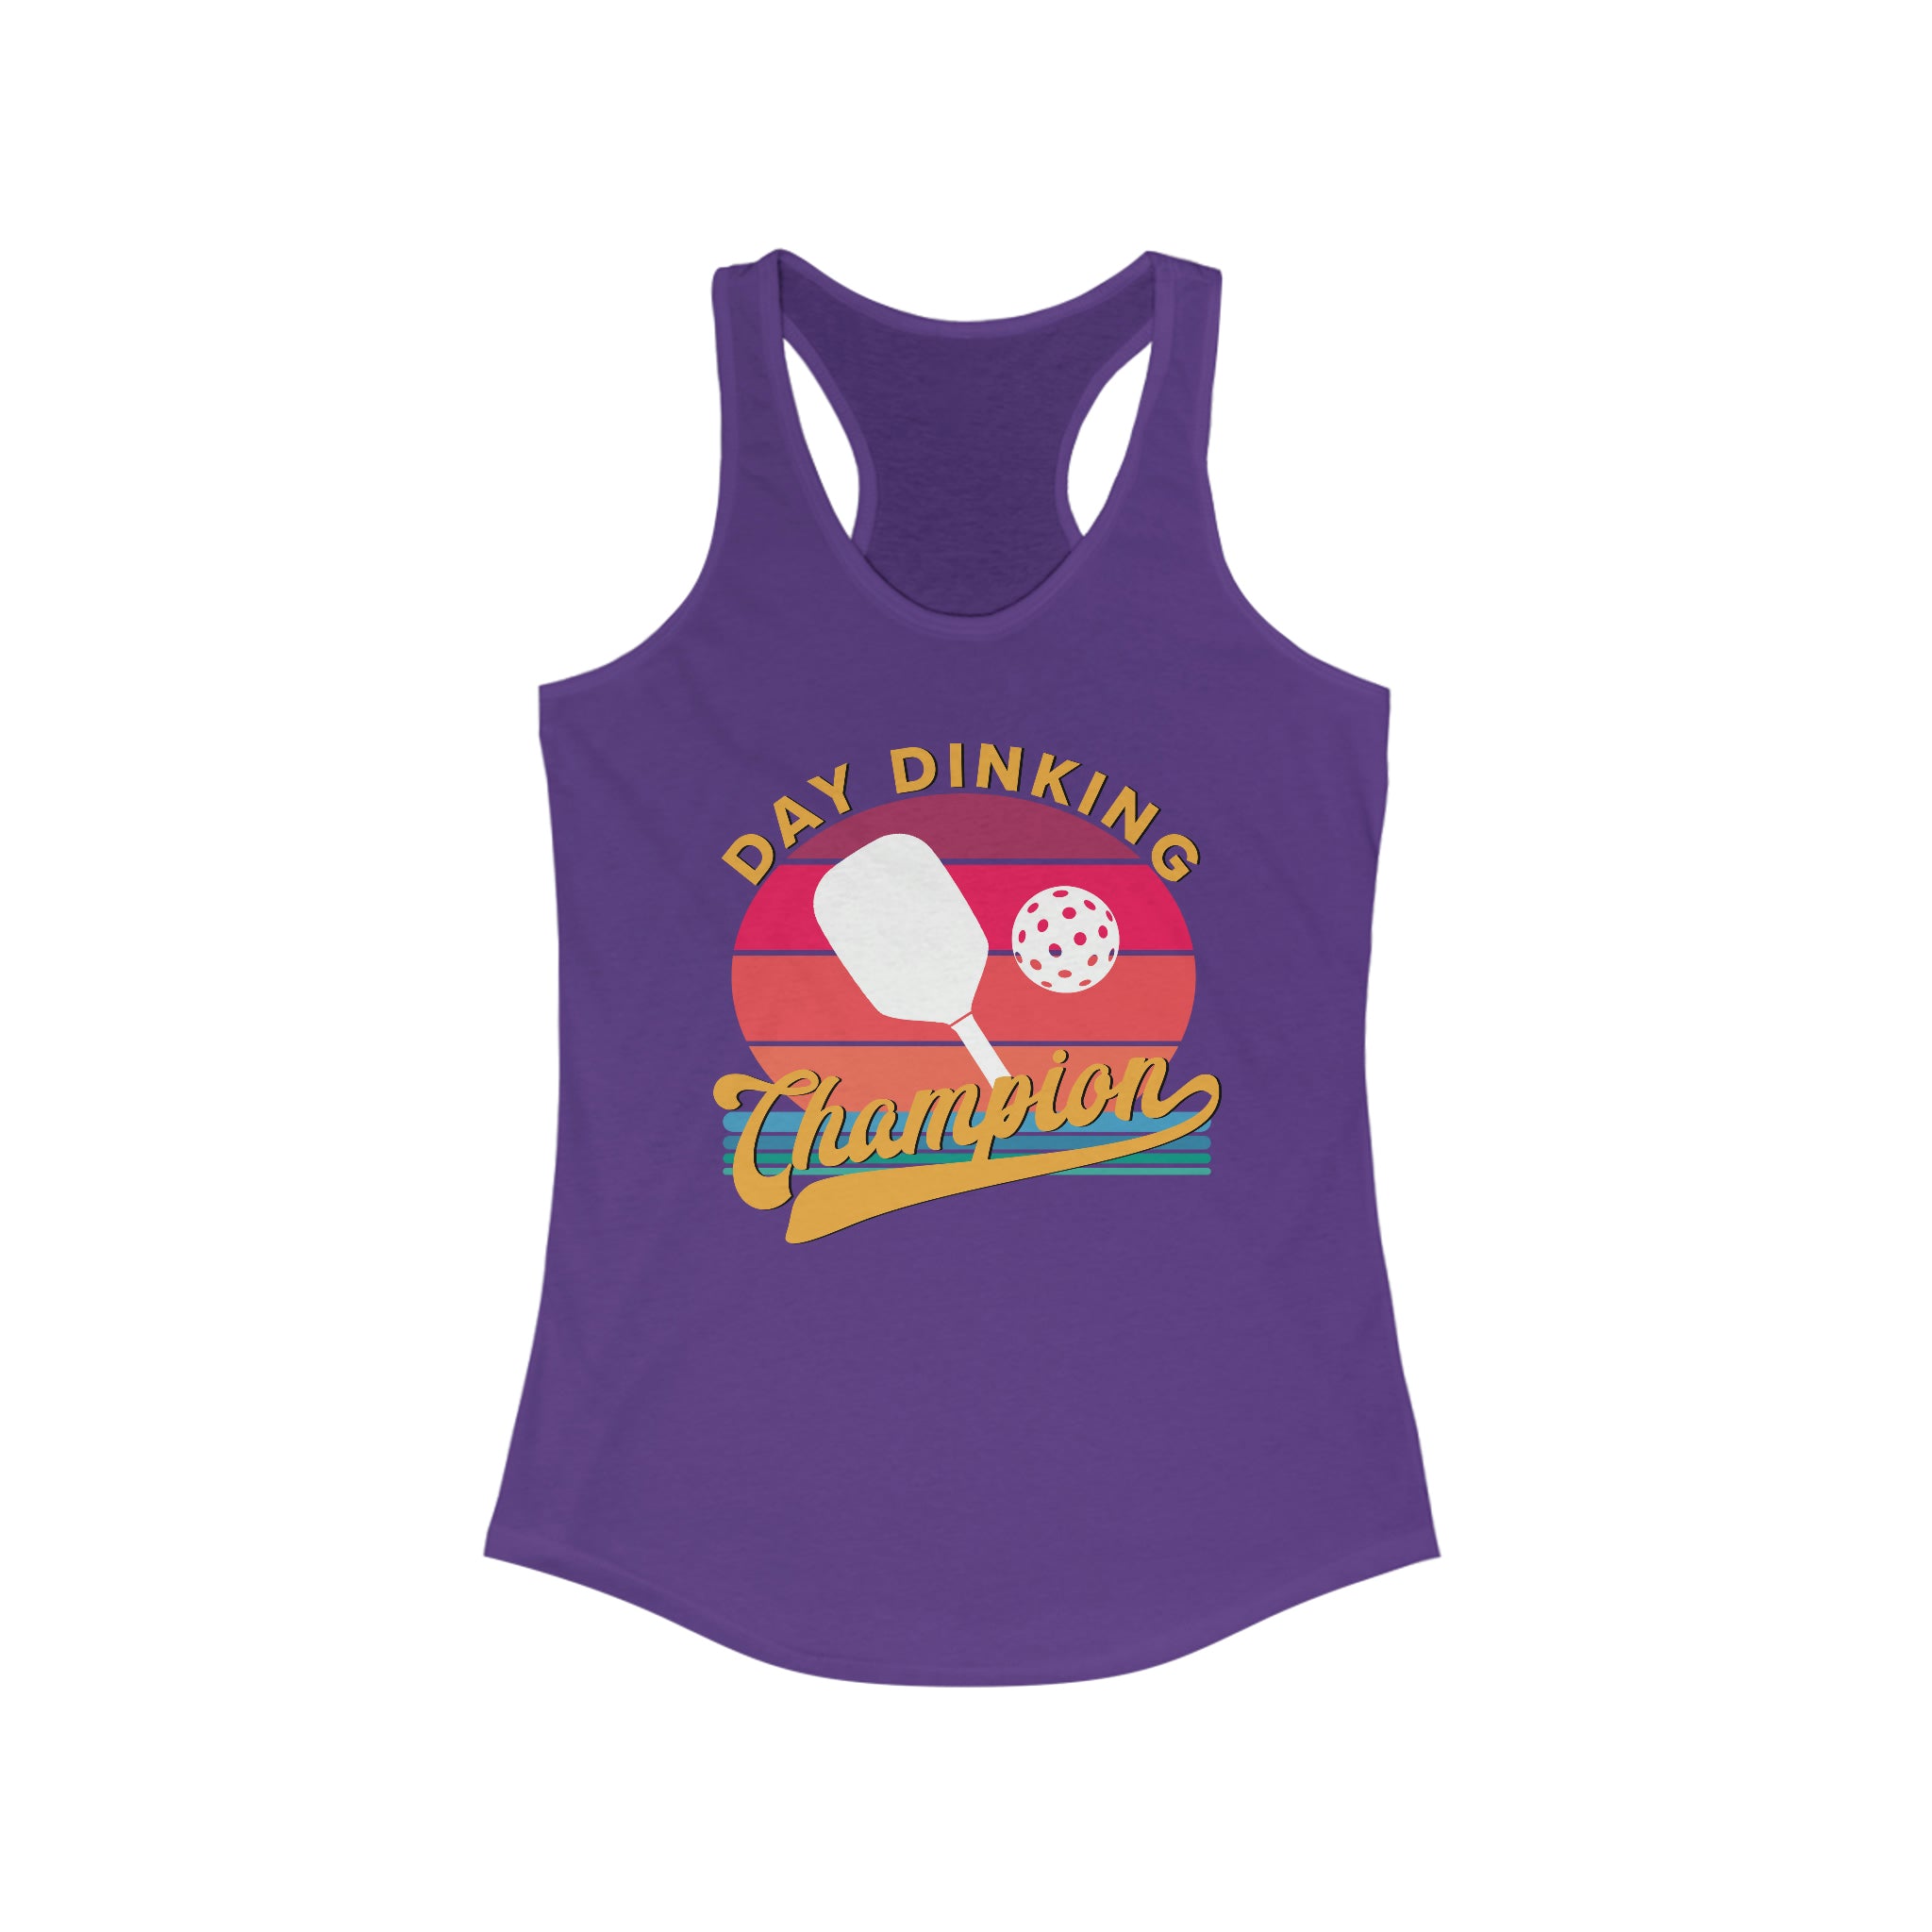 purple day dinking champion retro inspired pickleball apparel women's racerback tank top front view